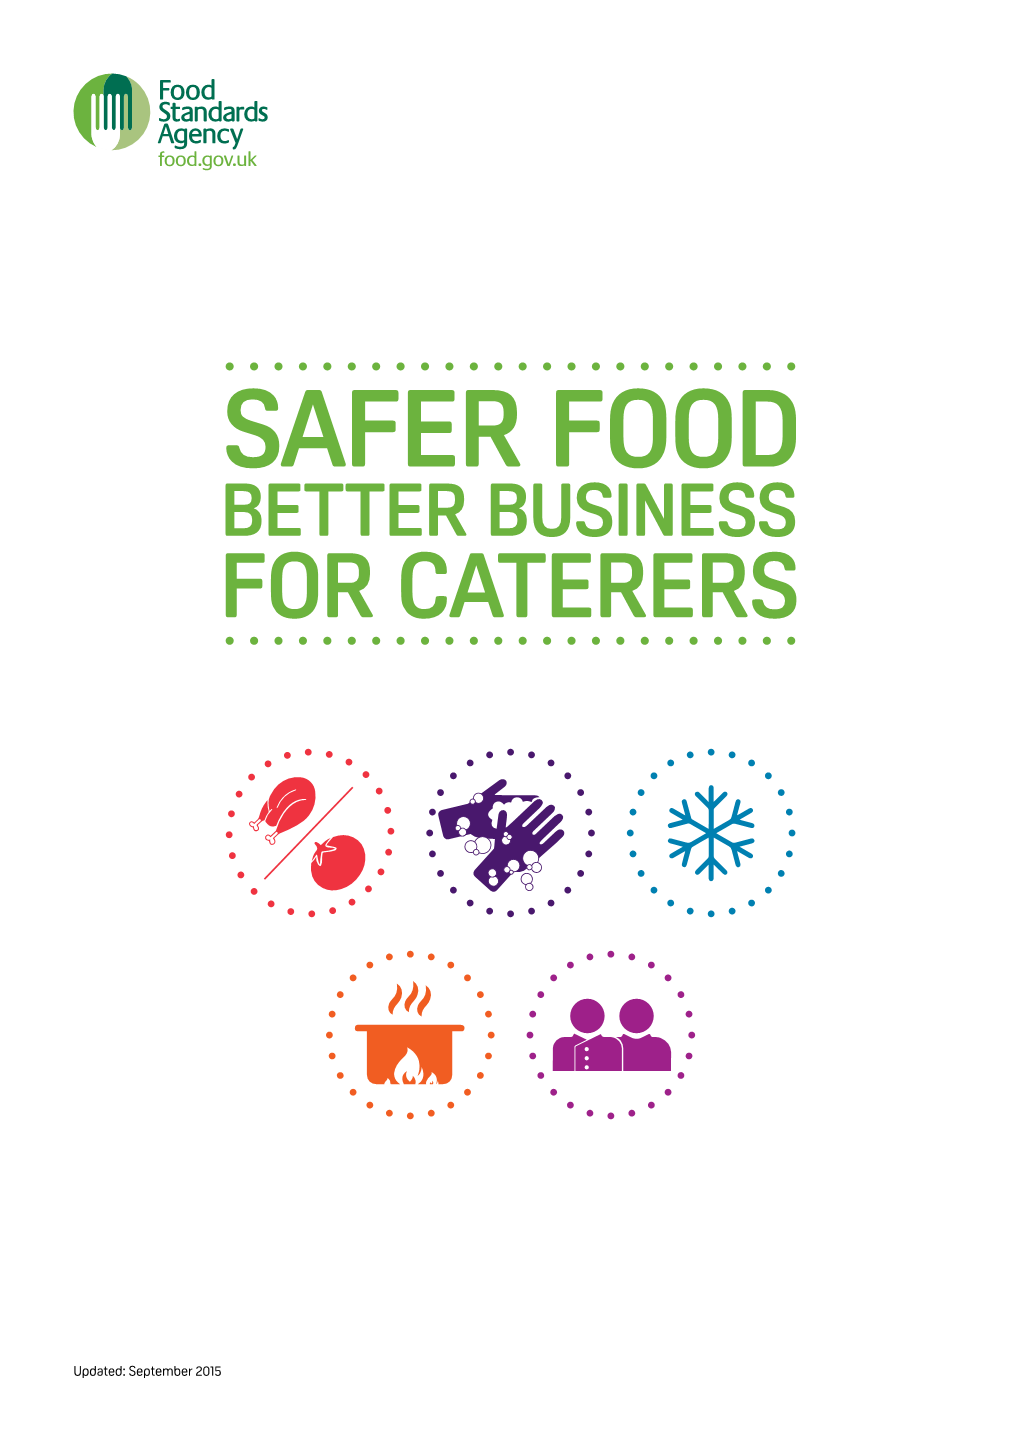 Safer Food Better Business for Caterers